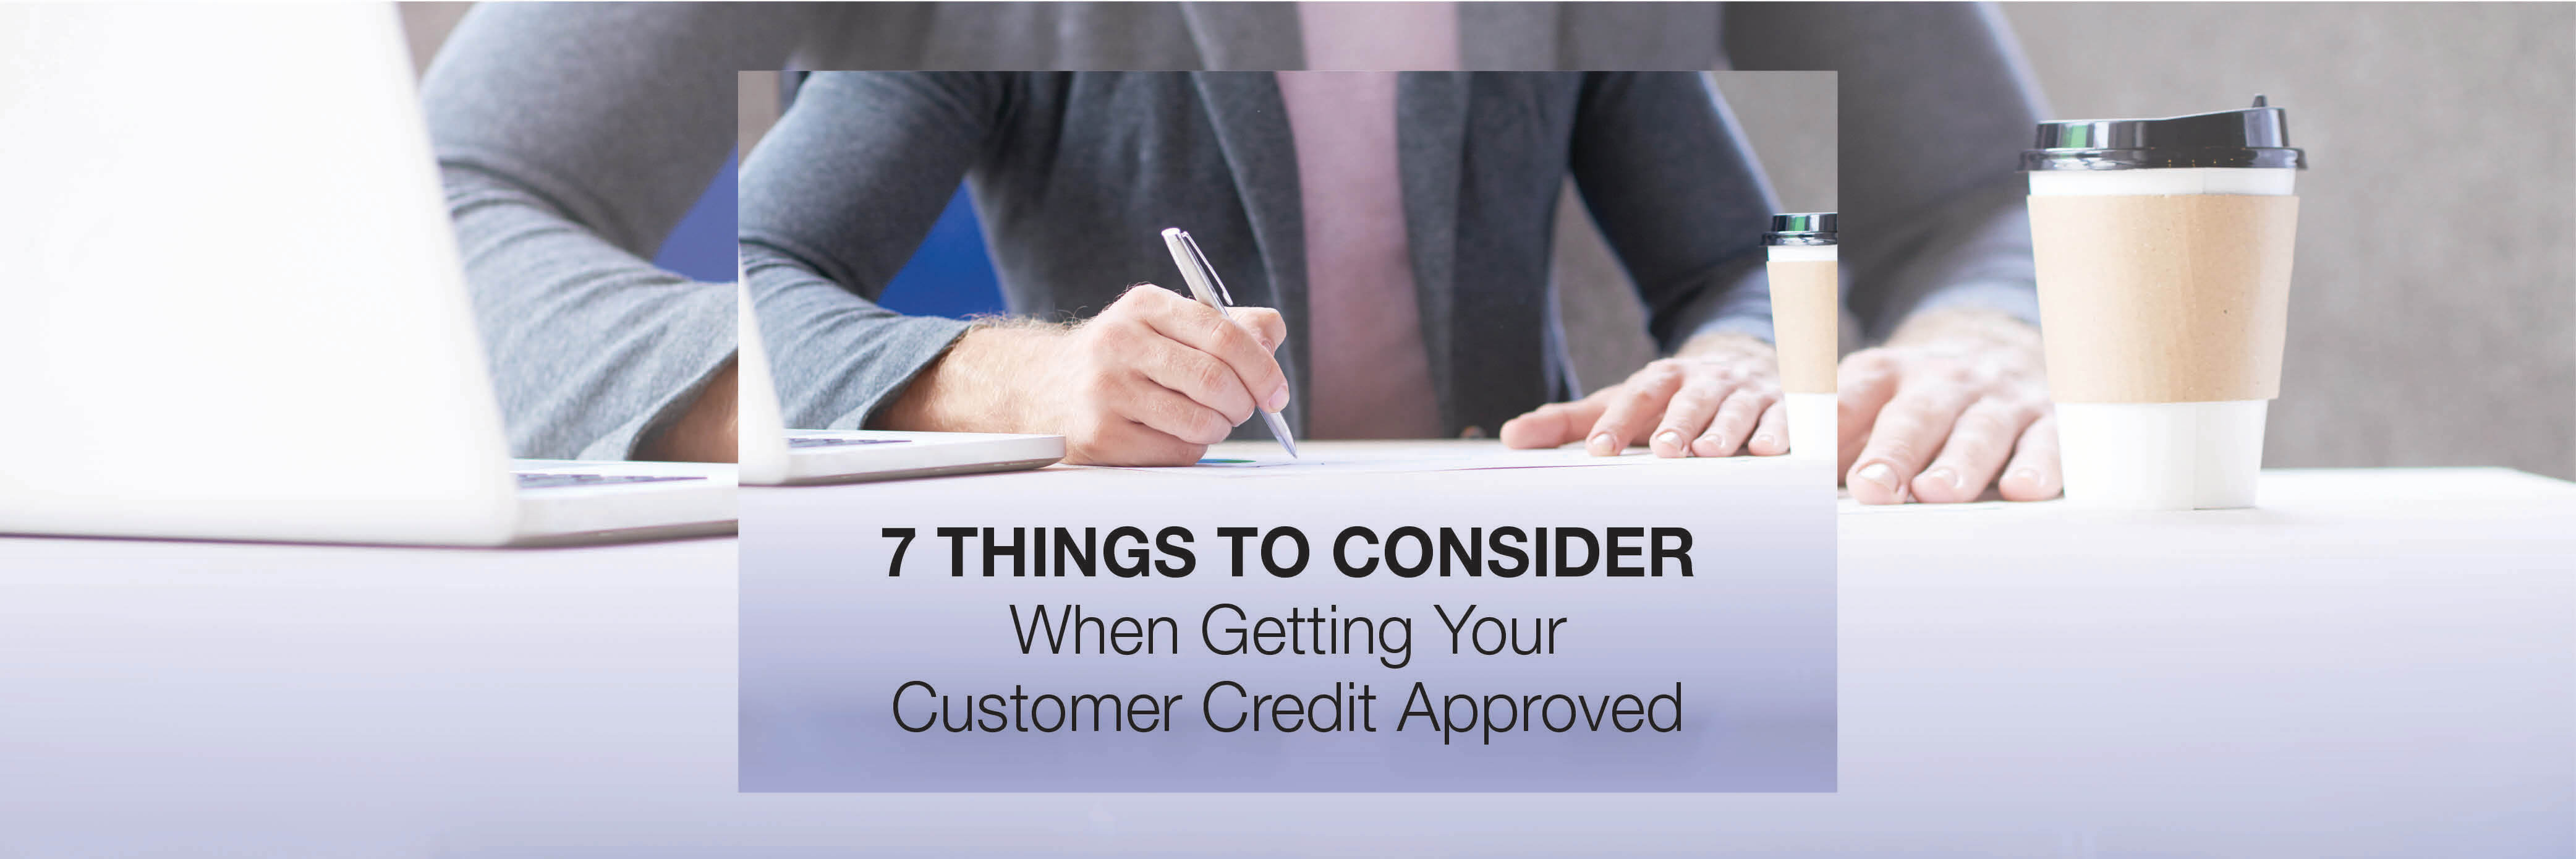 7 Things to Consider When Getting Your Customer Credit Approved